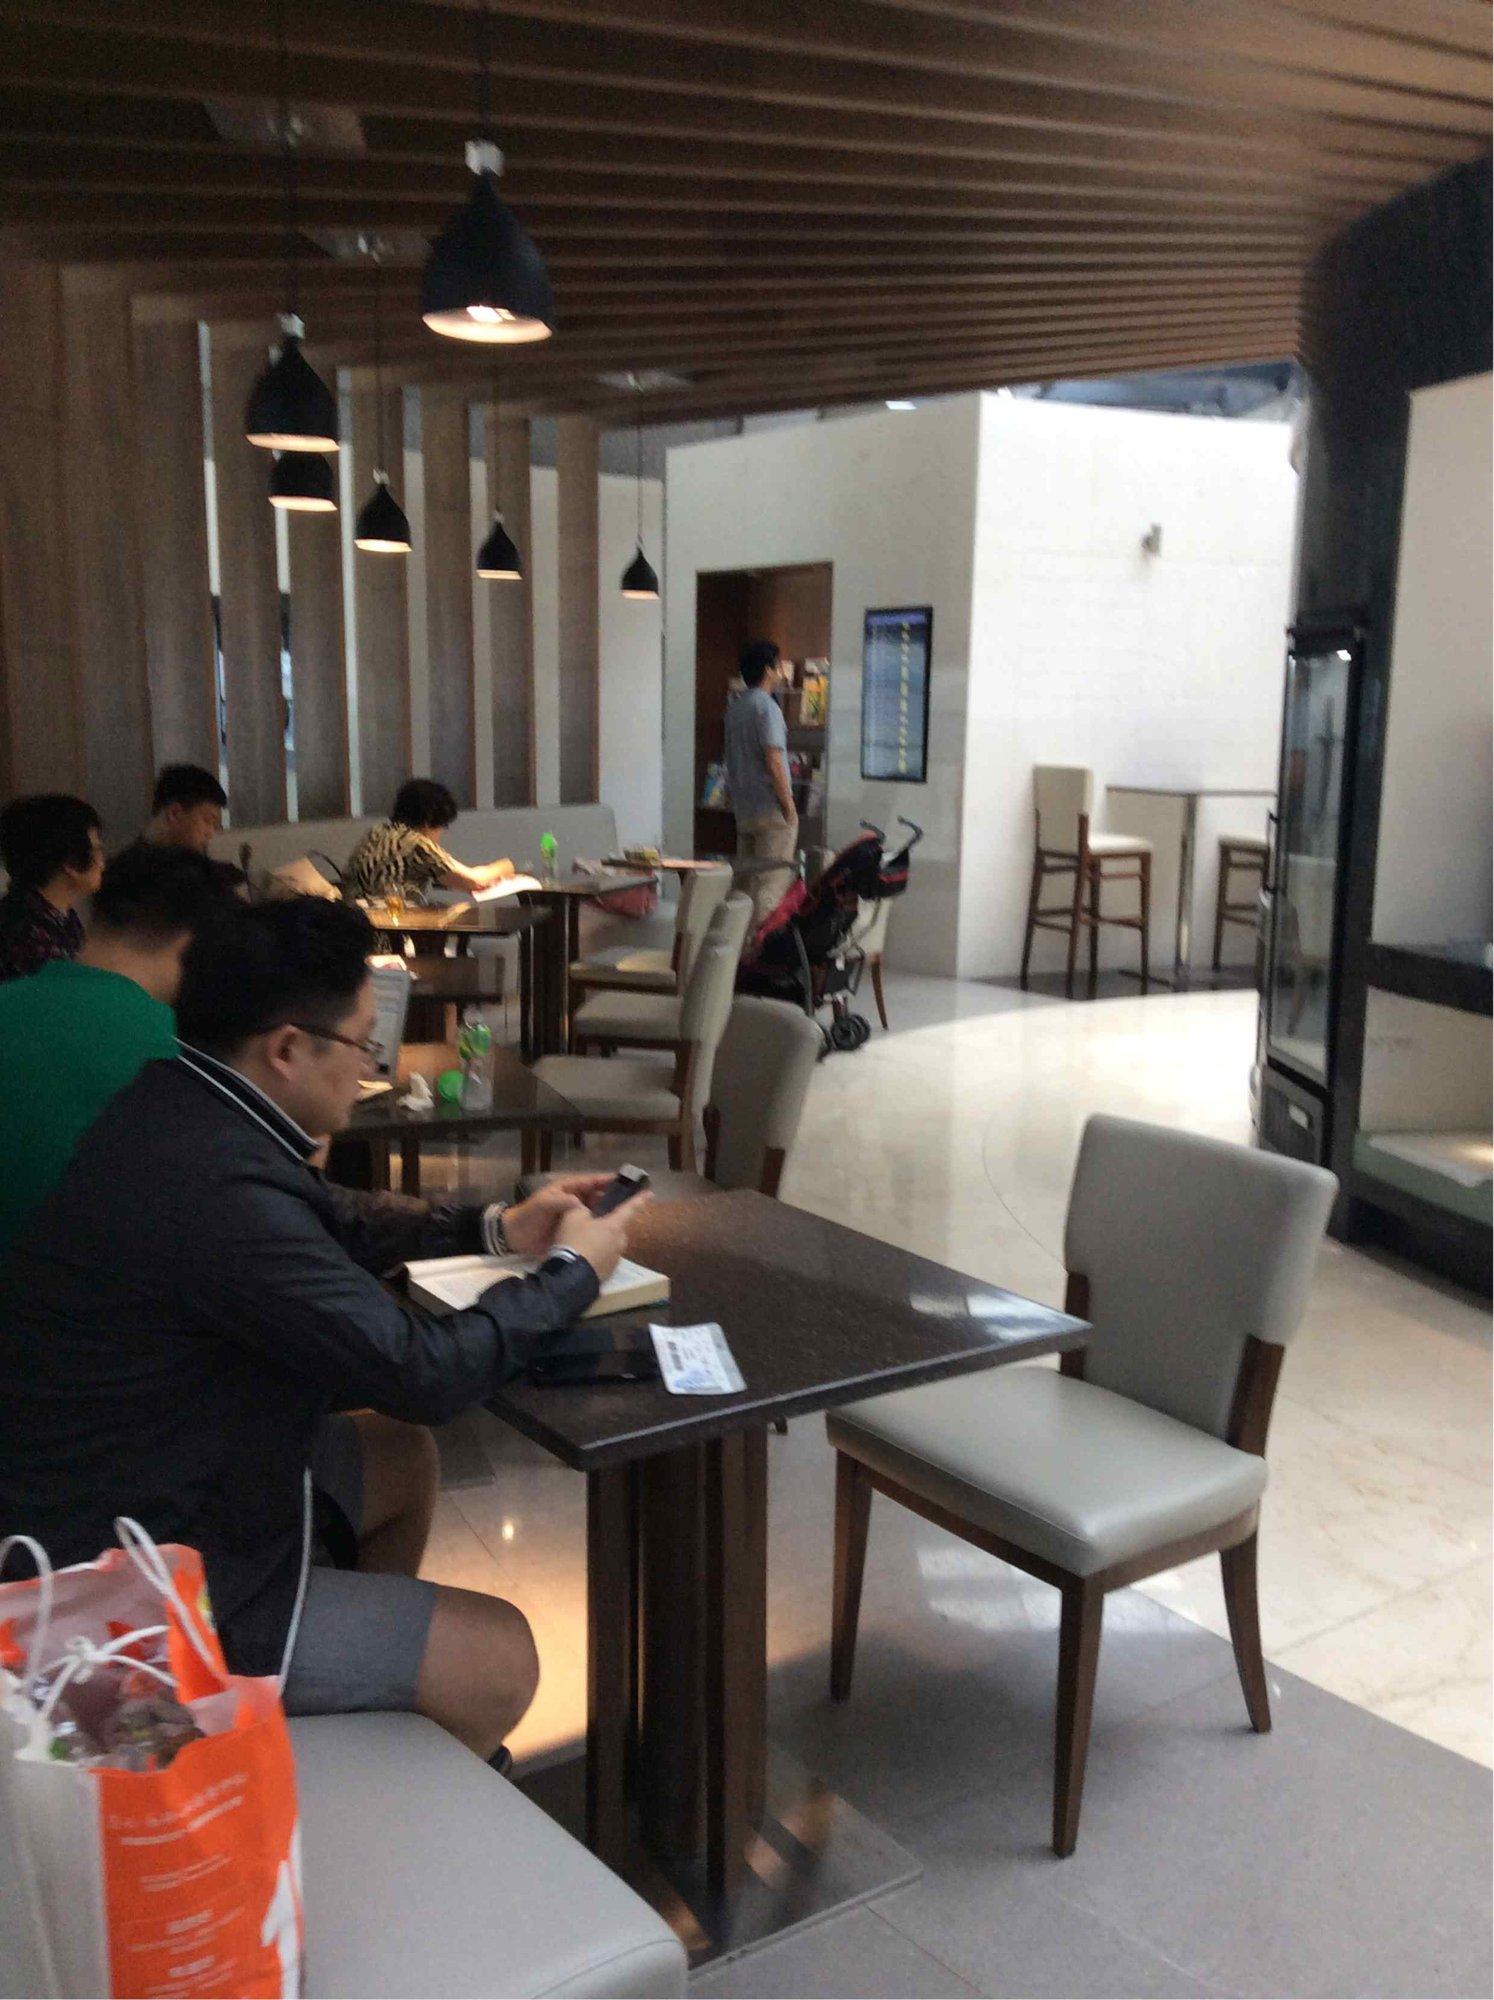 V8 Air China First & Business Class Lounge image 6 of 9